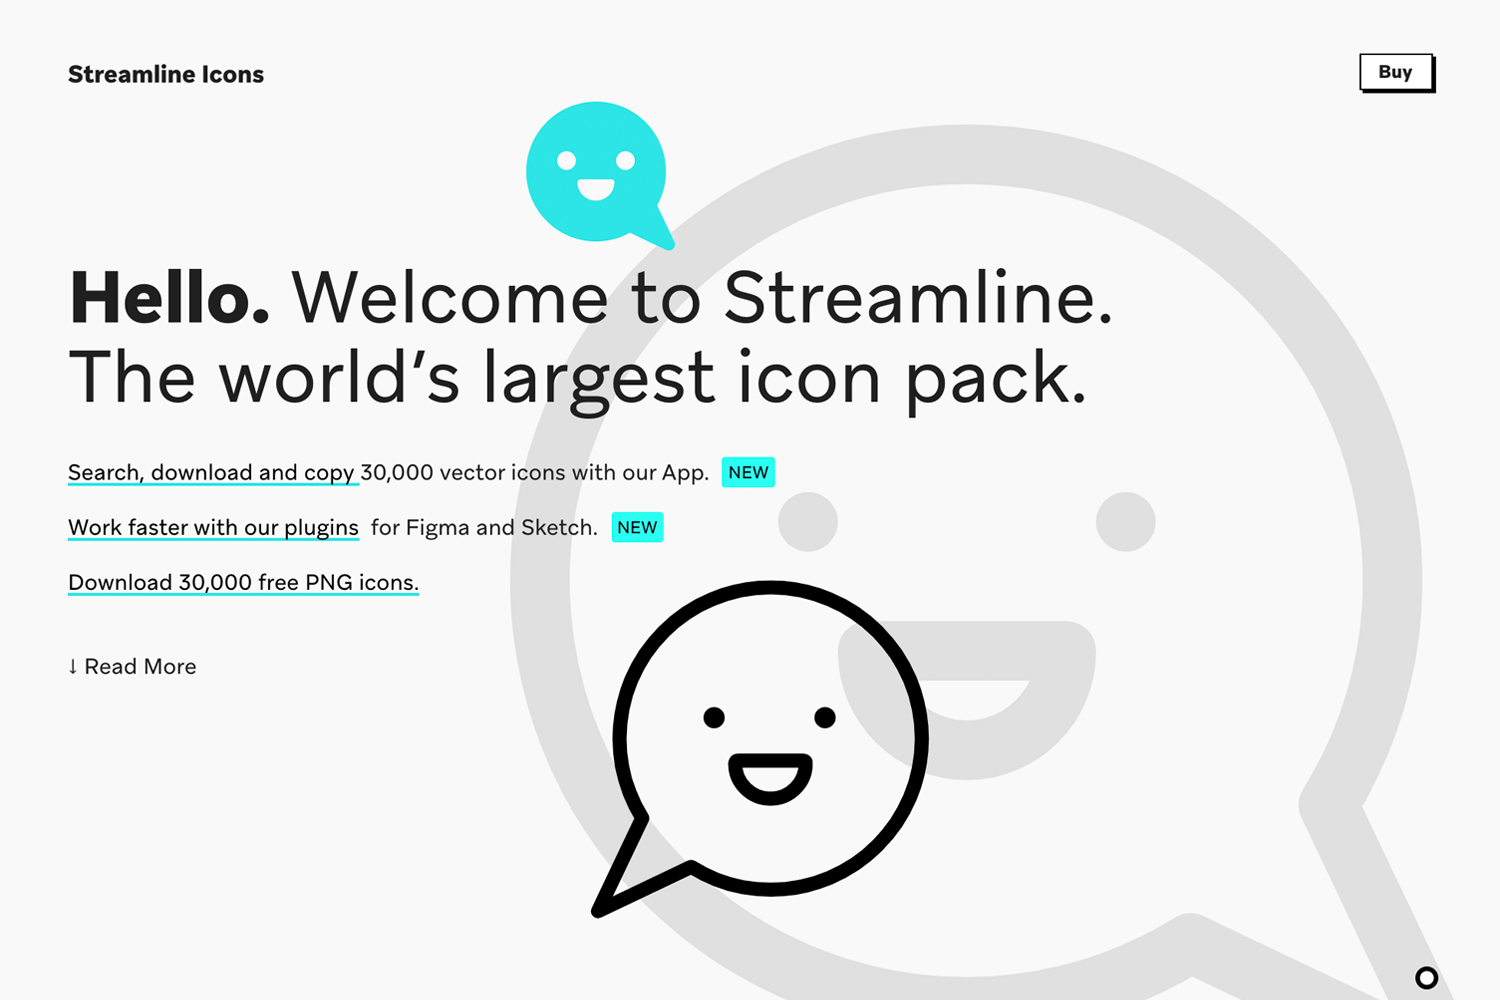 Free vector images - Streamline Icons homepage